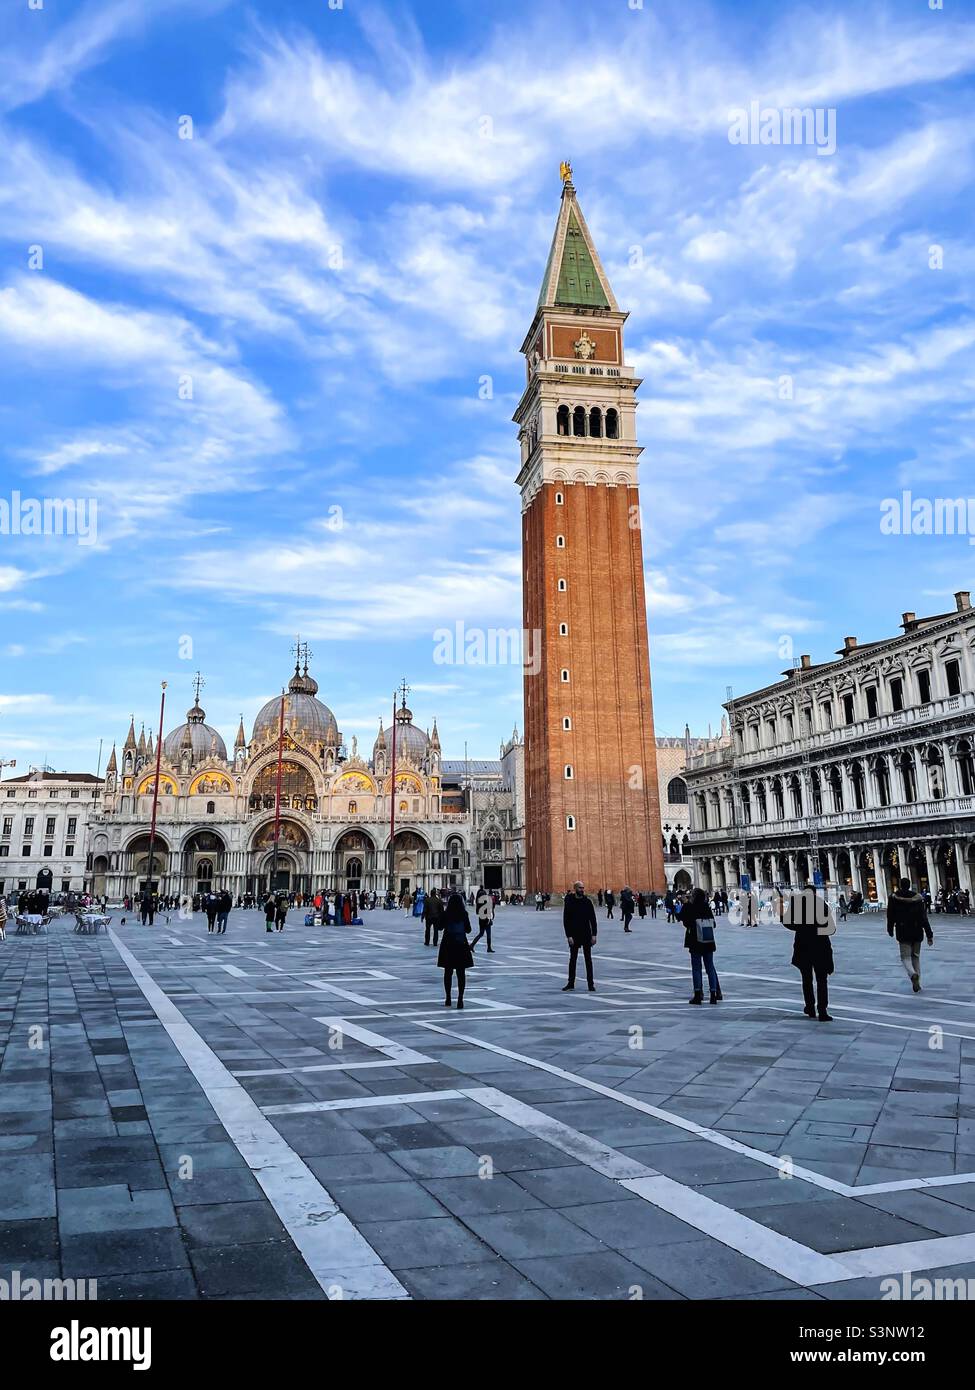 Piazza San Marco, St. Mark’s Square in Venice, Italy on a cool sunny February afternoon. Stock Photo